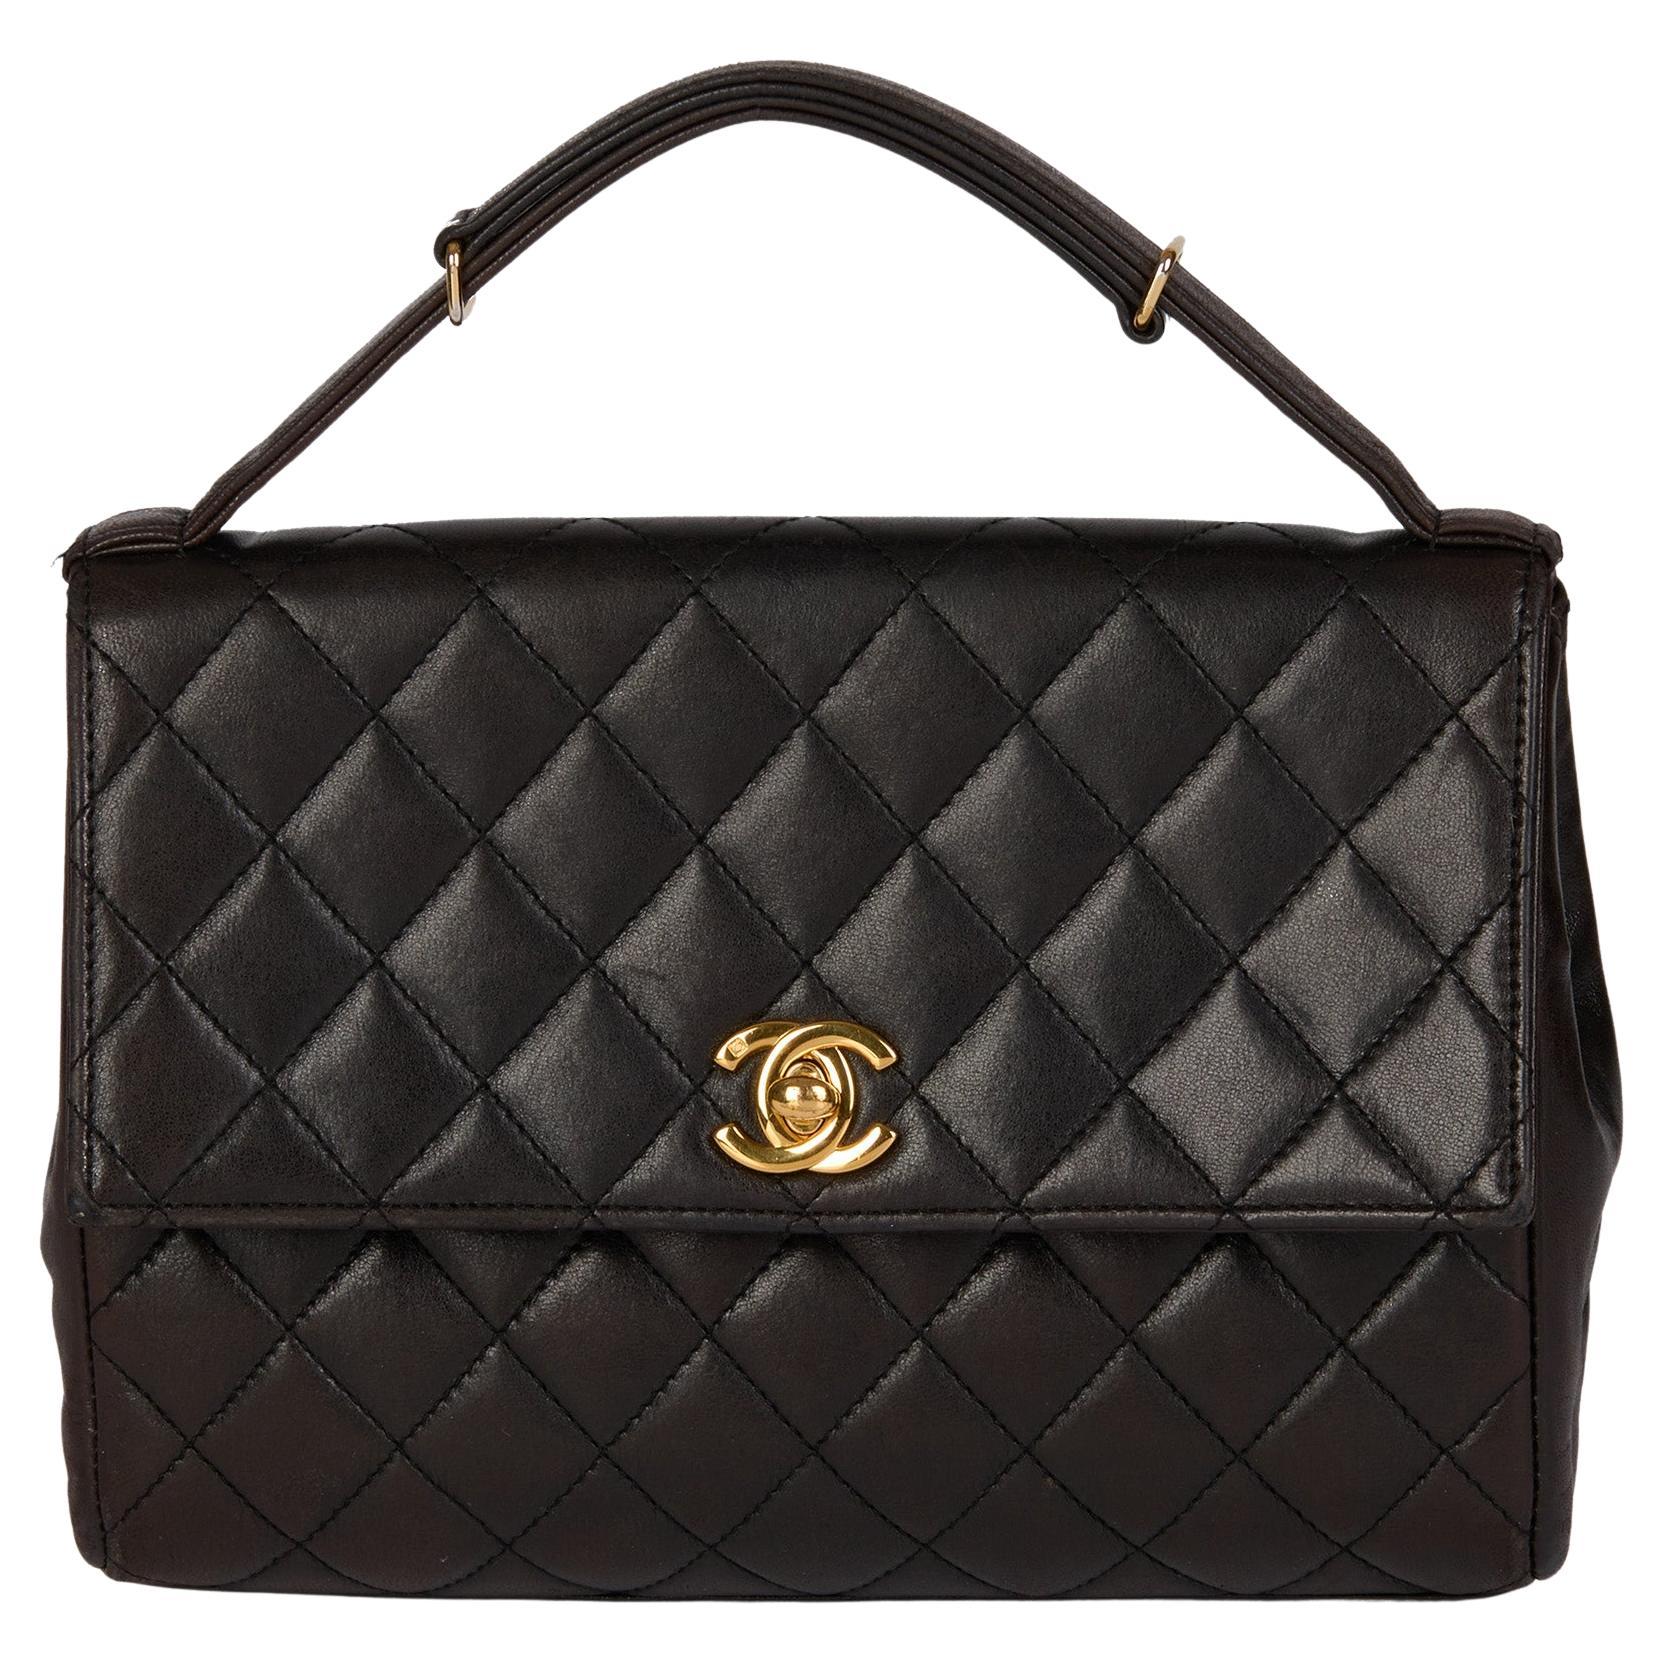 2014 Chanel Black Quilted Caviar Leather Maxi Classic Double Flap